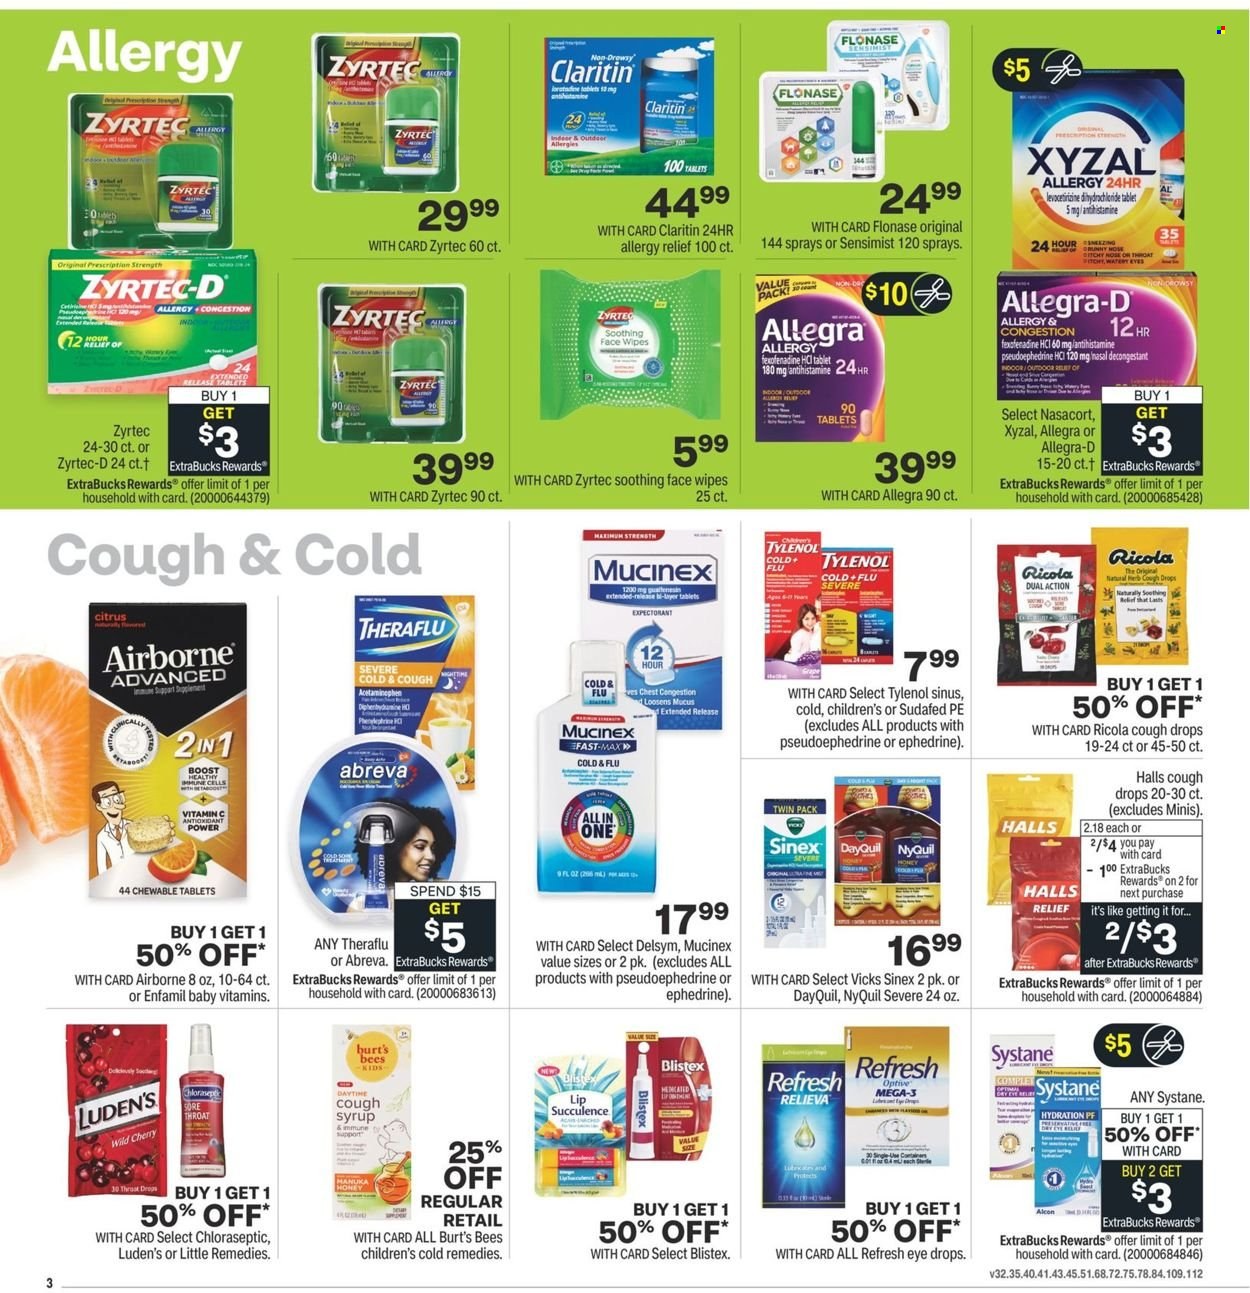 thumbnail - CVS Pharmacy Flyer - 01/30/2022 - 02/05/2022 - Sales products - ricola, Halls, Boost, Enfamil, wipes, Abreva, Vicks, DayQuil, Delsym, Cold & Flu, Mucinex, Sudafed, Systane, Theraflu, Tylenol, vitamin c, Zyrtec, NyQuil, eye drops, syrup, cough drops, allergy relief, Sinex. Page 4.